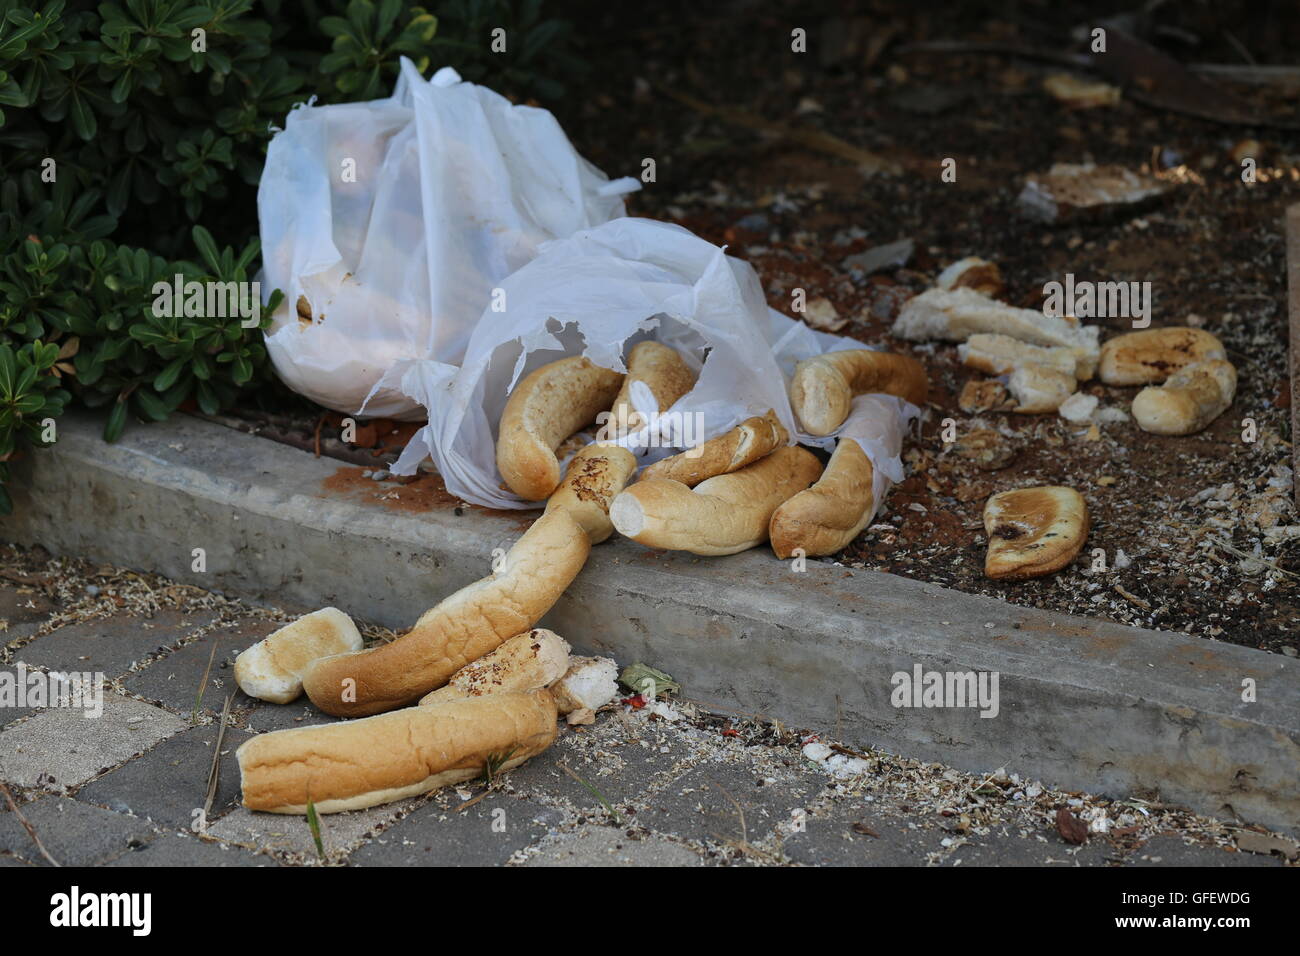 Wasted Bread Rolls. Stack of leftover buns and baguettes thrown on the a sidewalk in a white plastic bag. Food waste. Thrown away food. Stock Photo